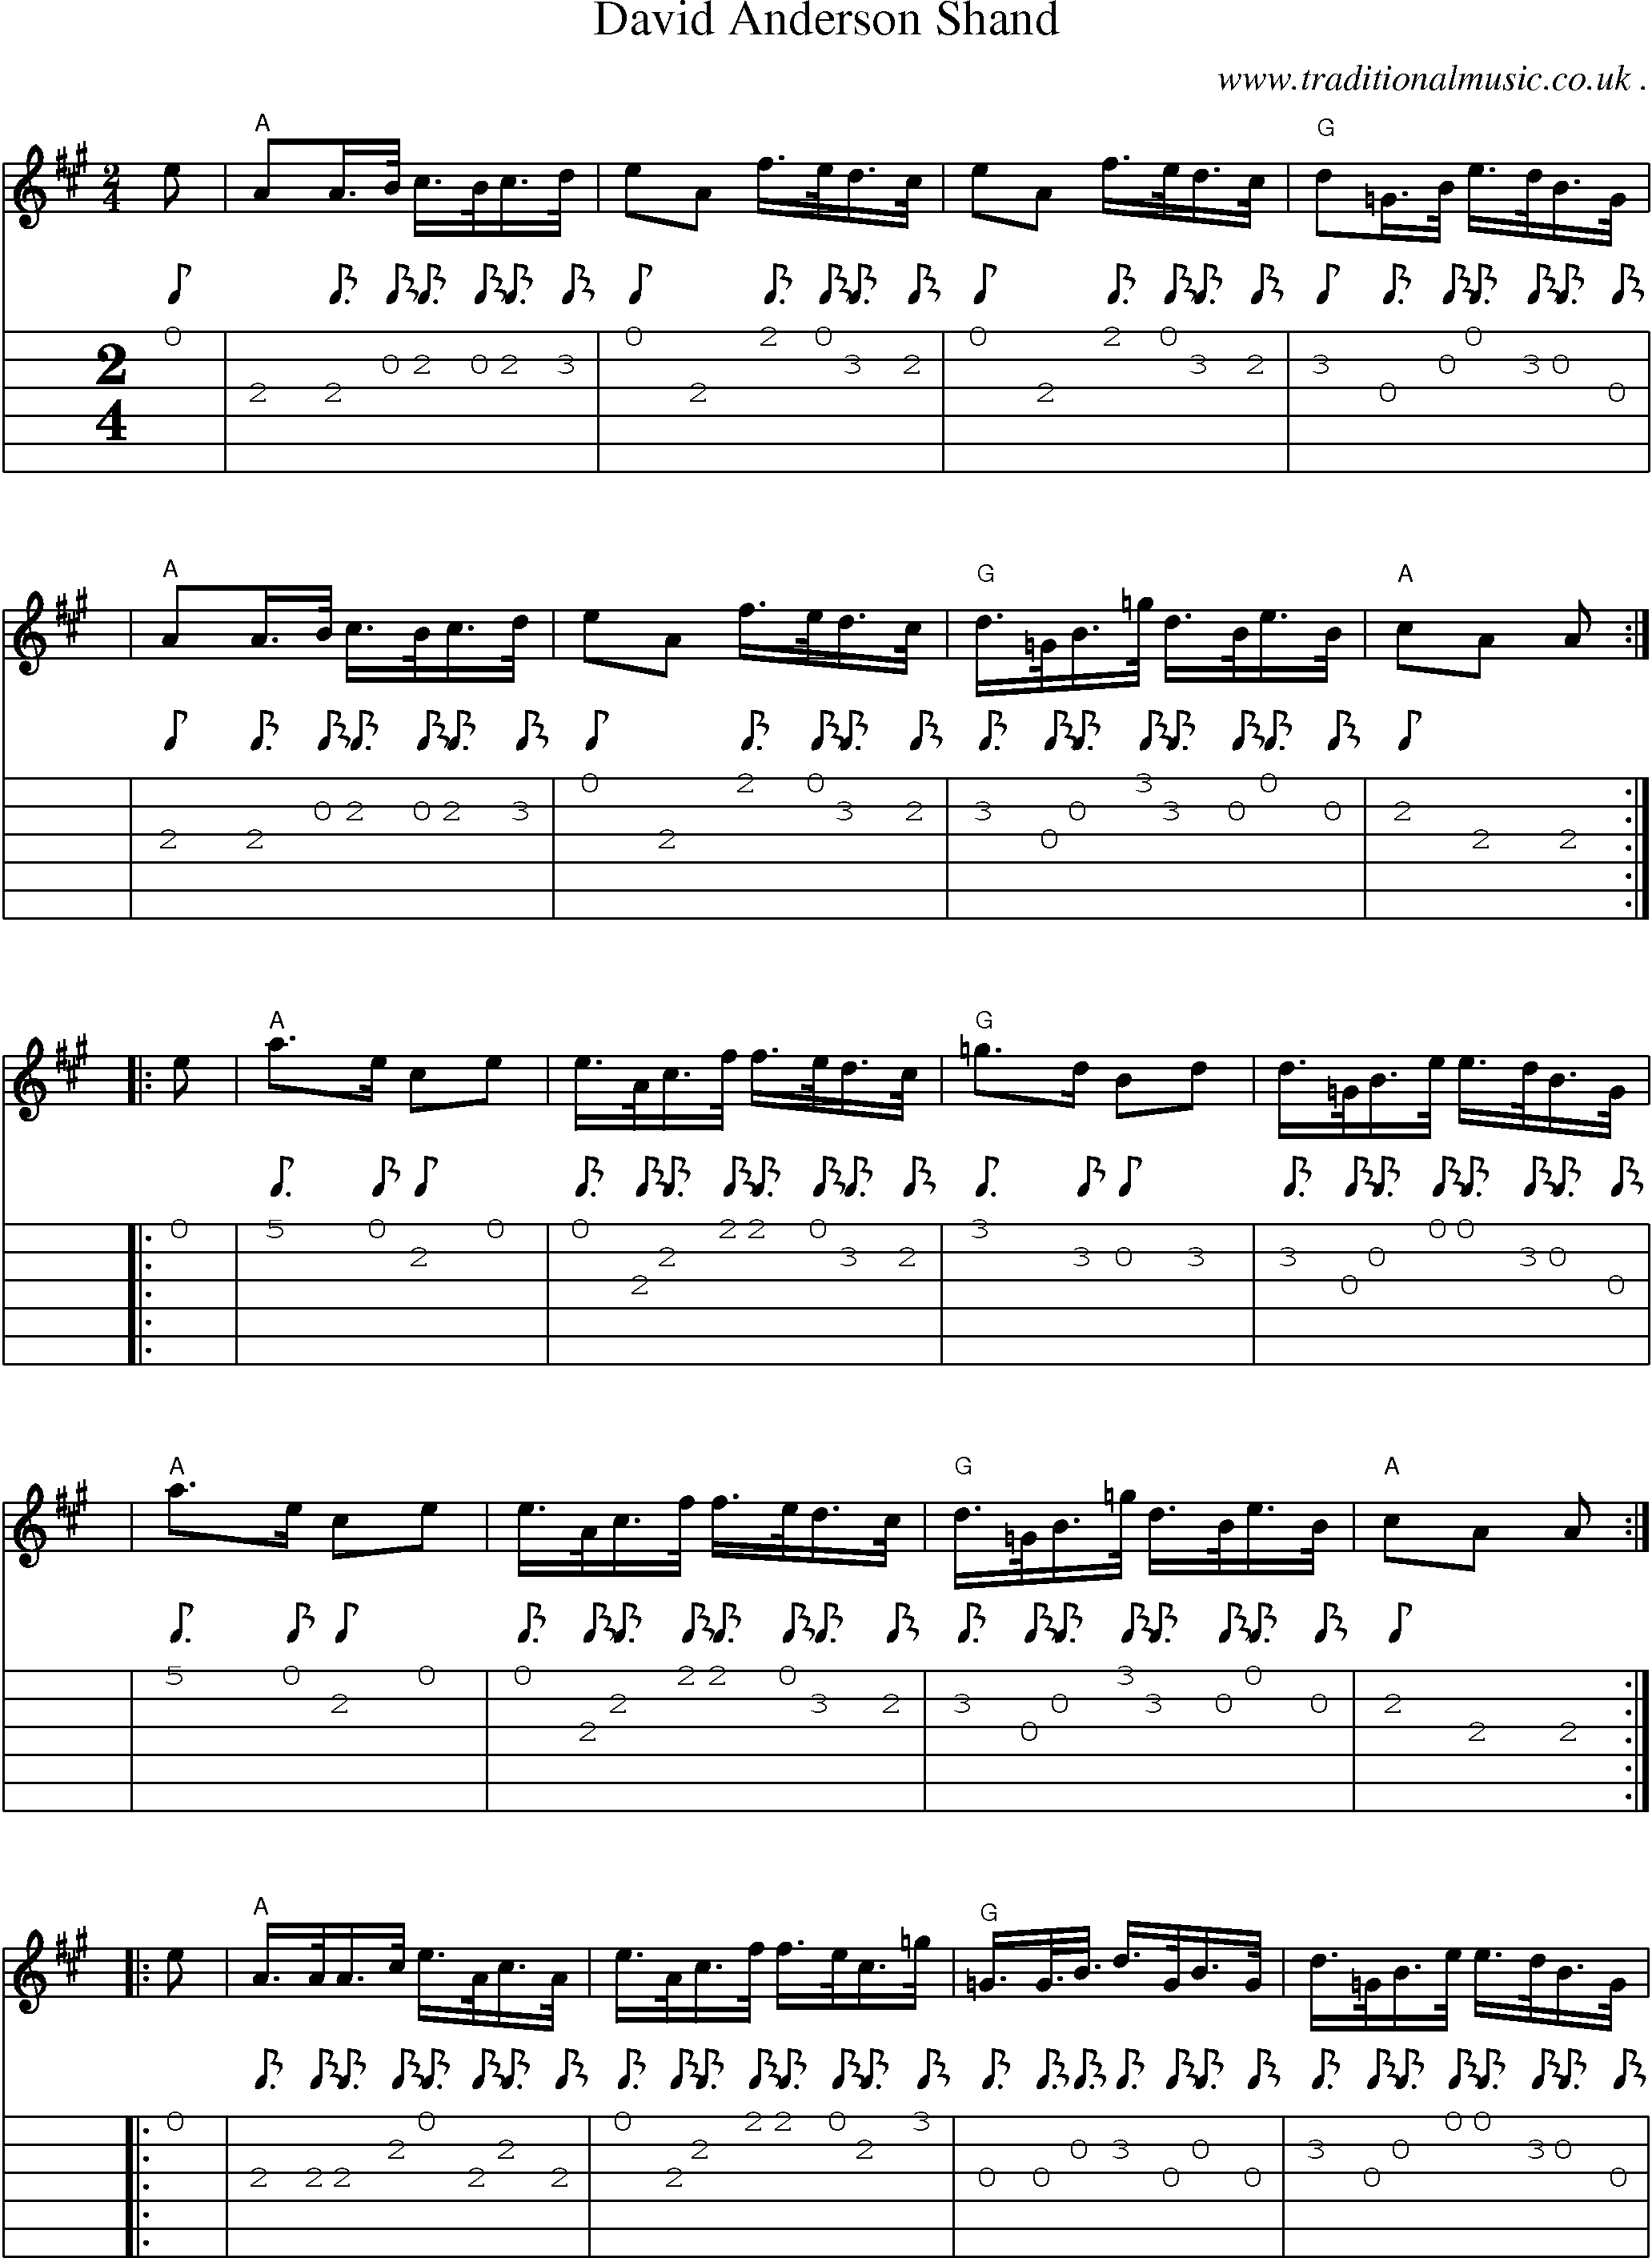 Sheet-music  score, Chords and Guitar Tabs for David Anderson Shand